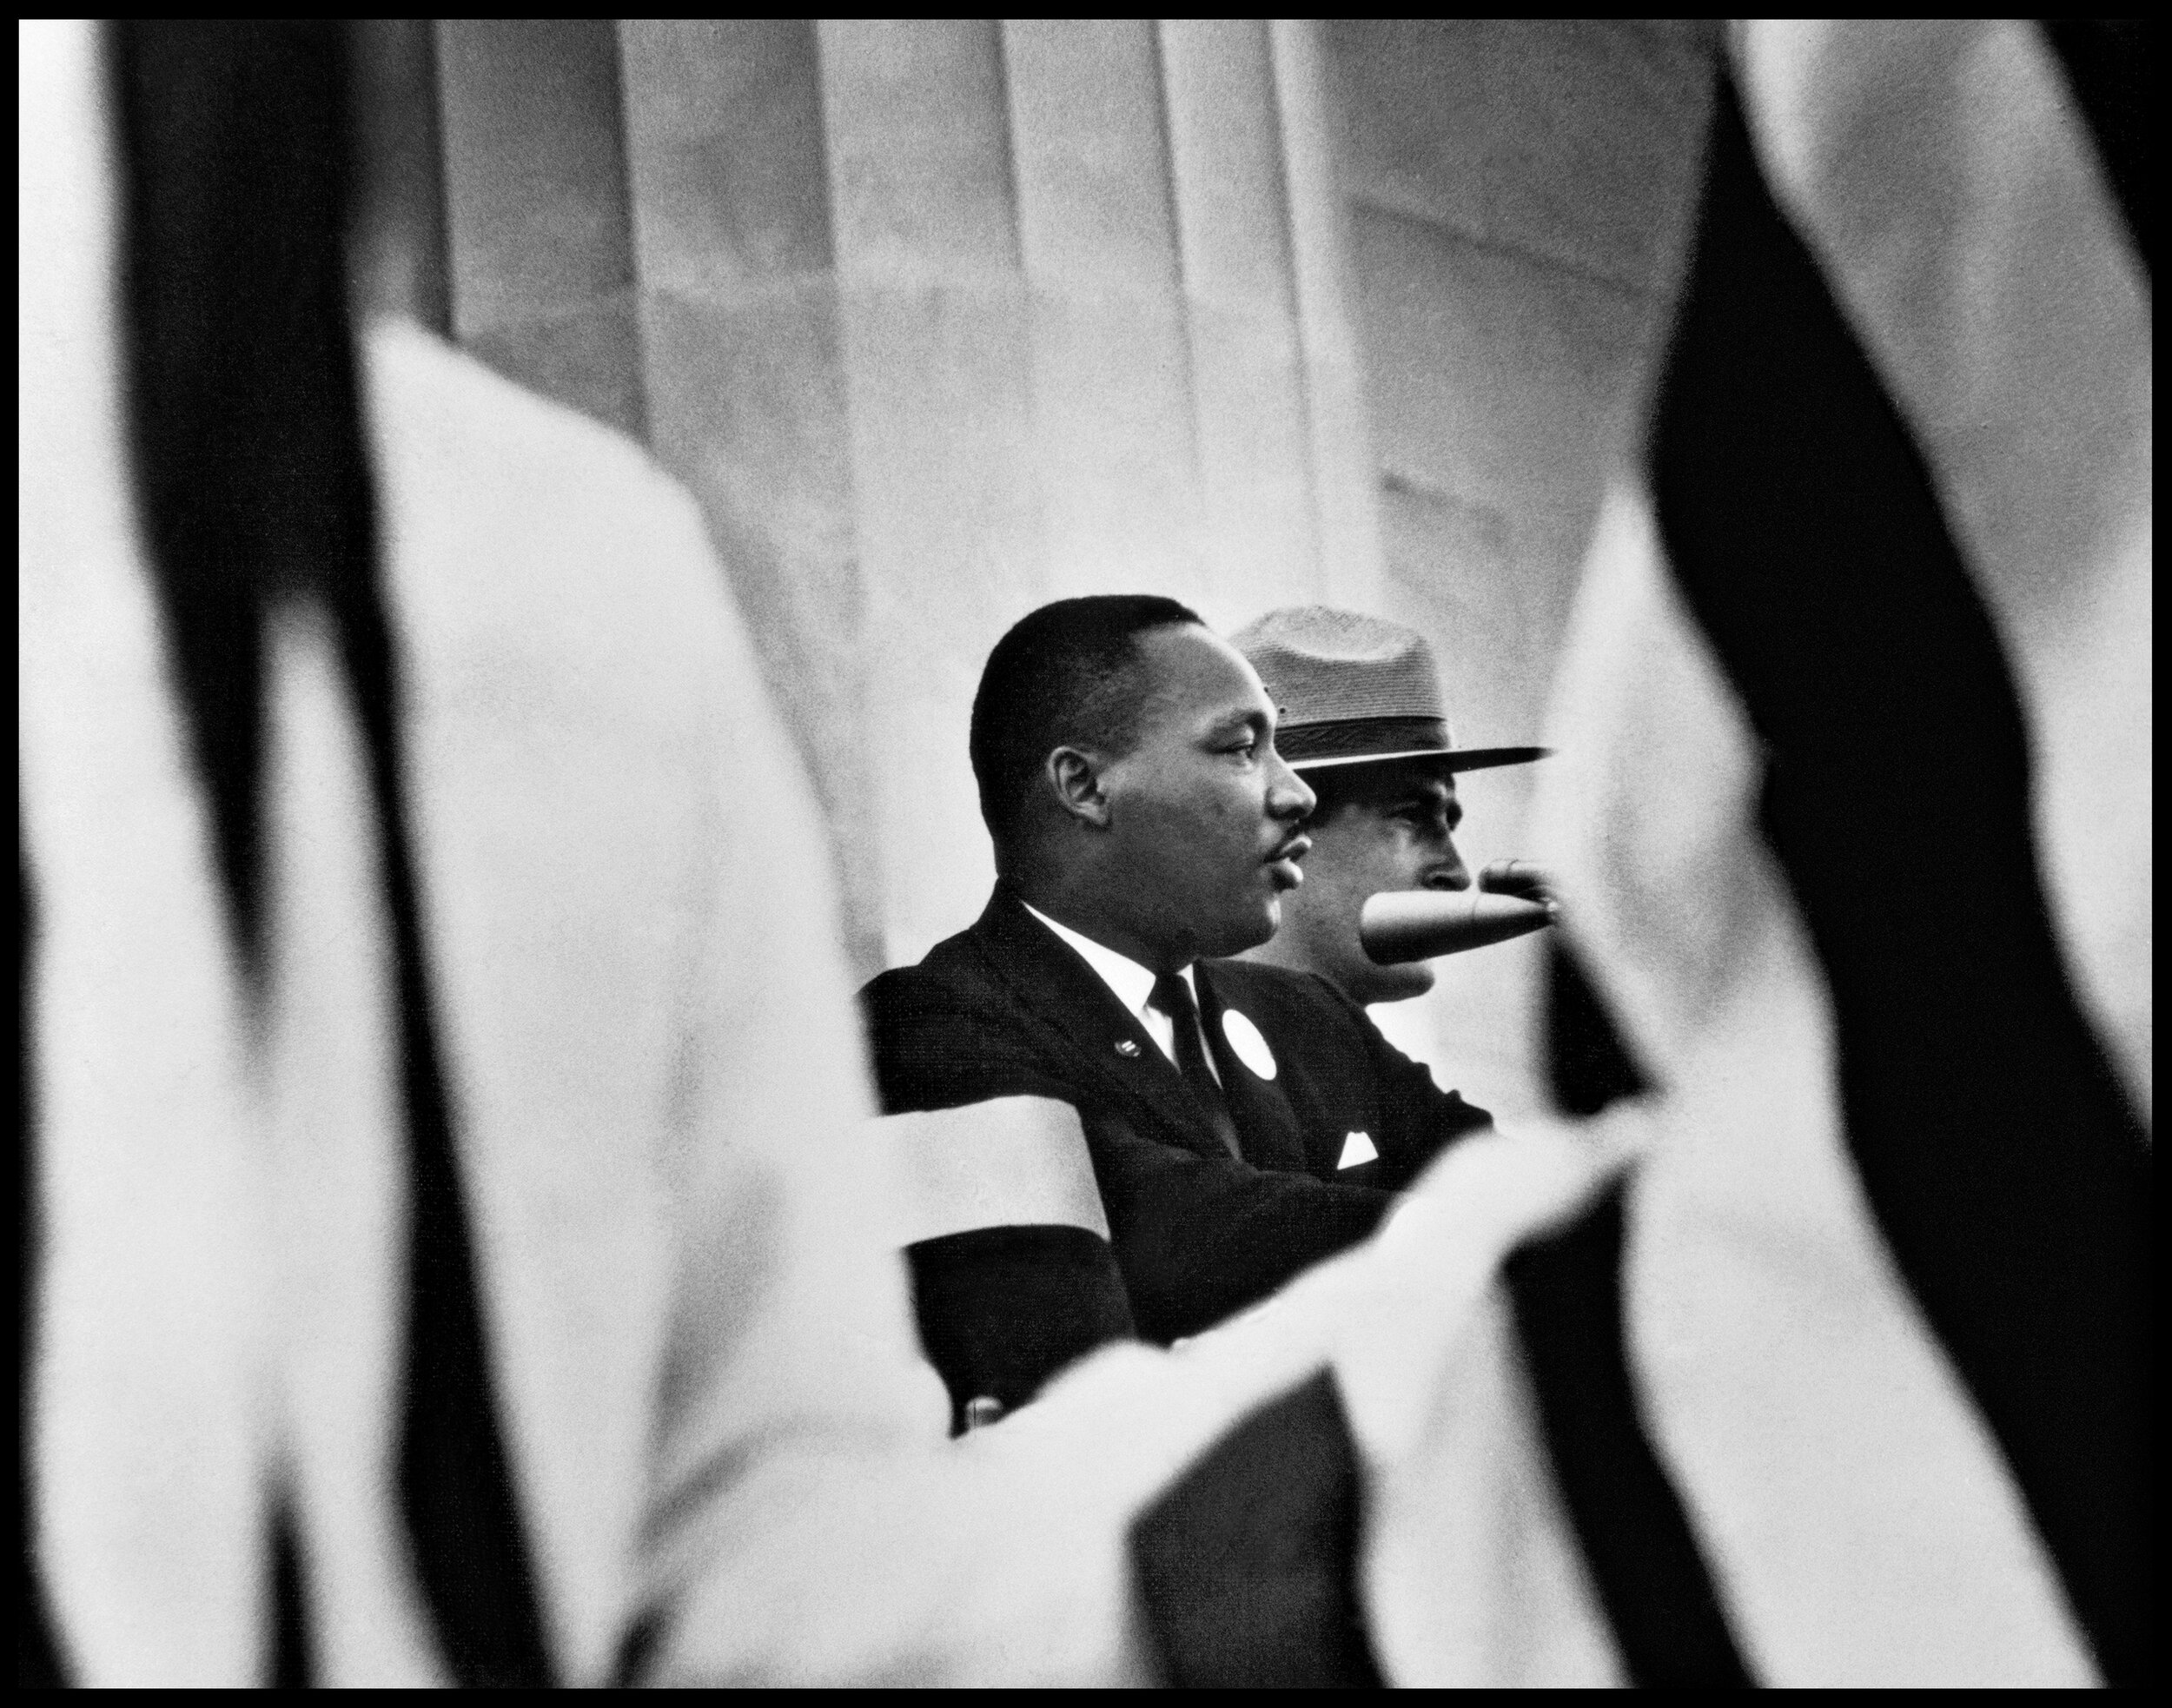  Martin Luther King, Jr., Washington, D.C., 1963 Gordon Parks Foundation authentication stamp on verso Gelatin silver print 16 x 20 inches, paper size Edition of 25    Credit: Photograph by Gordon Parks Copyright: Courtesy of and copyright The Gordon